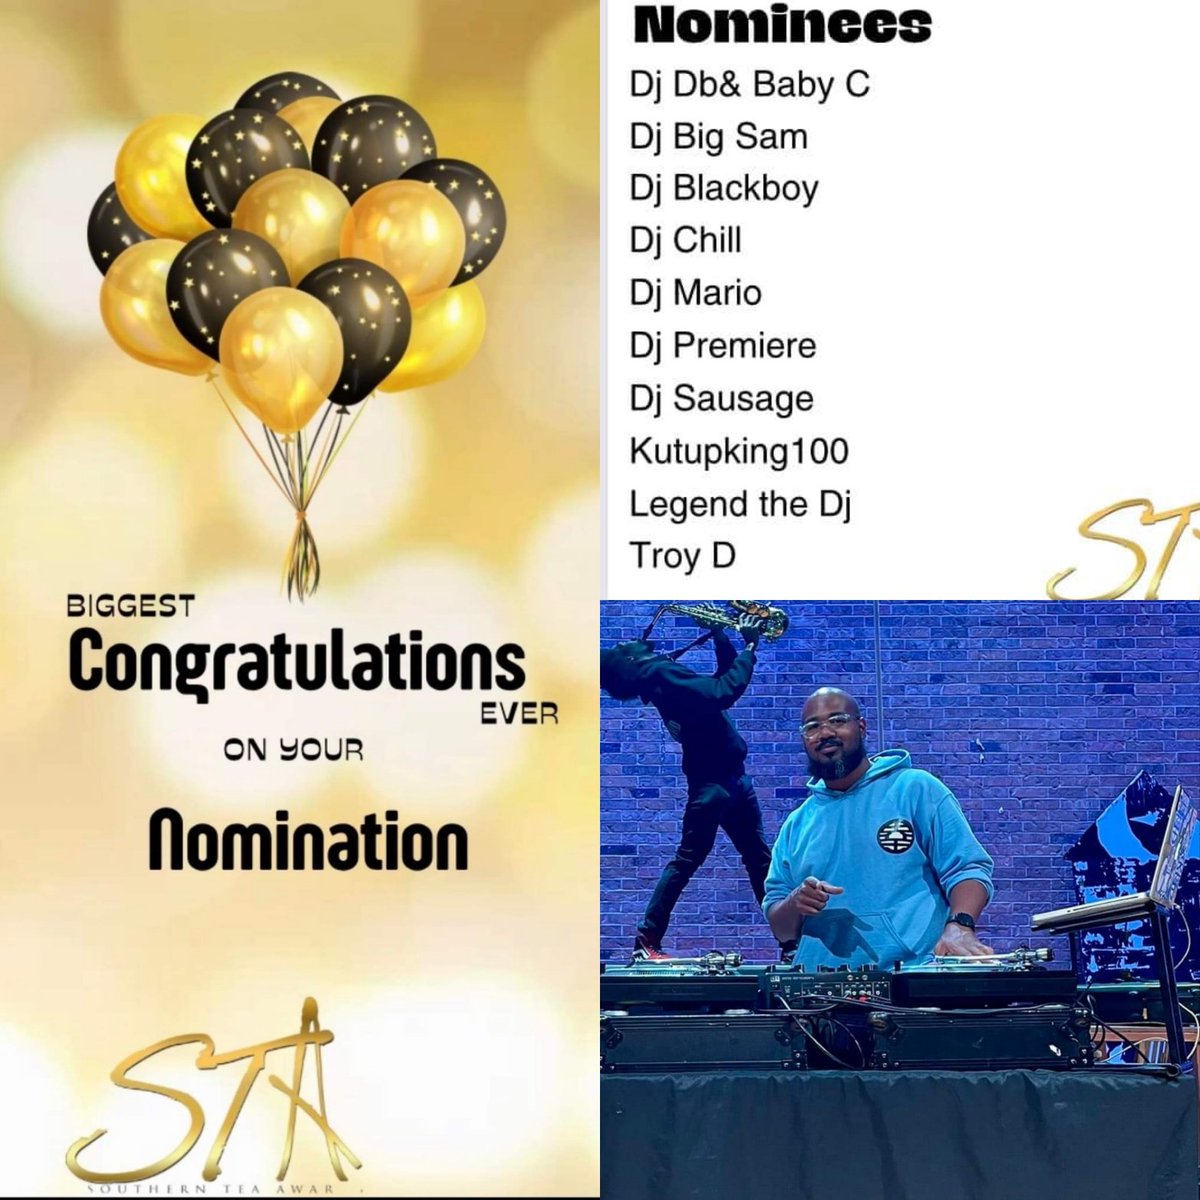 #LeGeNdTheDJ 
✨️✨️✨️✨️✨️✨️✨️✨️
Nominated for another #SouthernTeaAward 
🏆🏆🏆🏆🏆🏆🏆🏆🏆🏆
@southernteamagazine  appreciate the recognition and nomination ! Thank you to all that nominated me !

#GoDjs #GoDjsLA #LeGeNdTheDJ #Turntablist #OpenFormat #DJLife